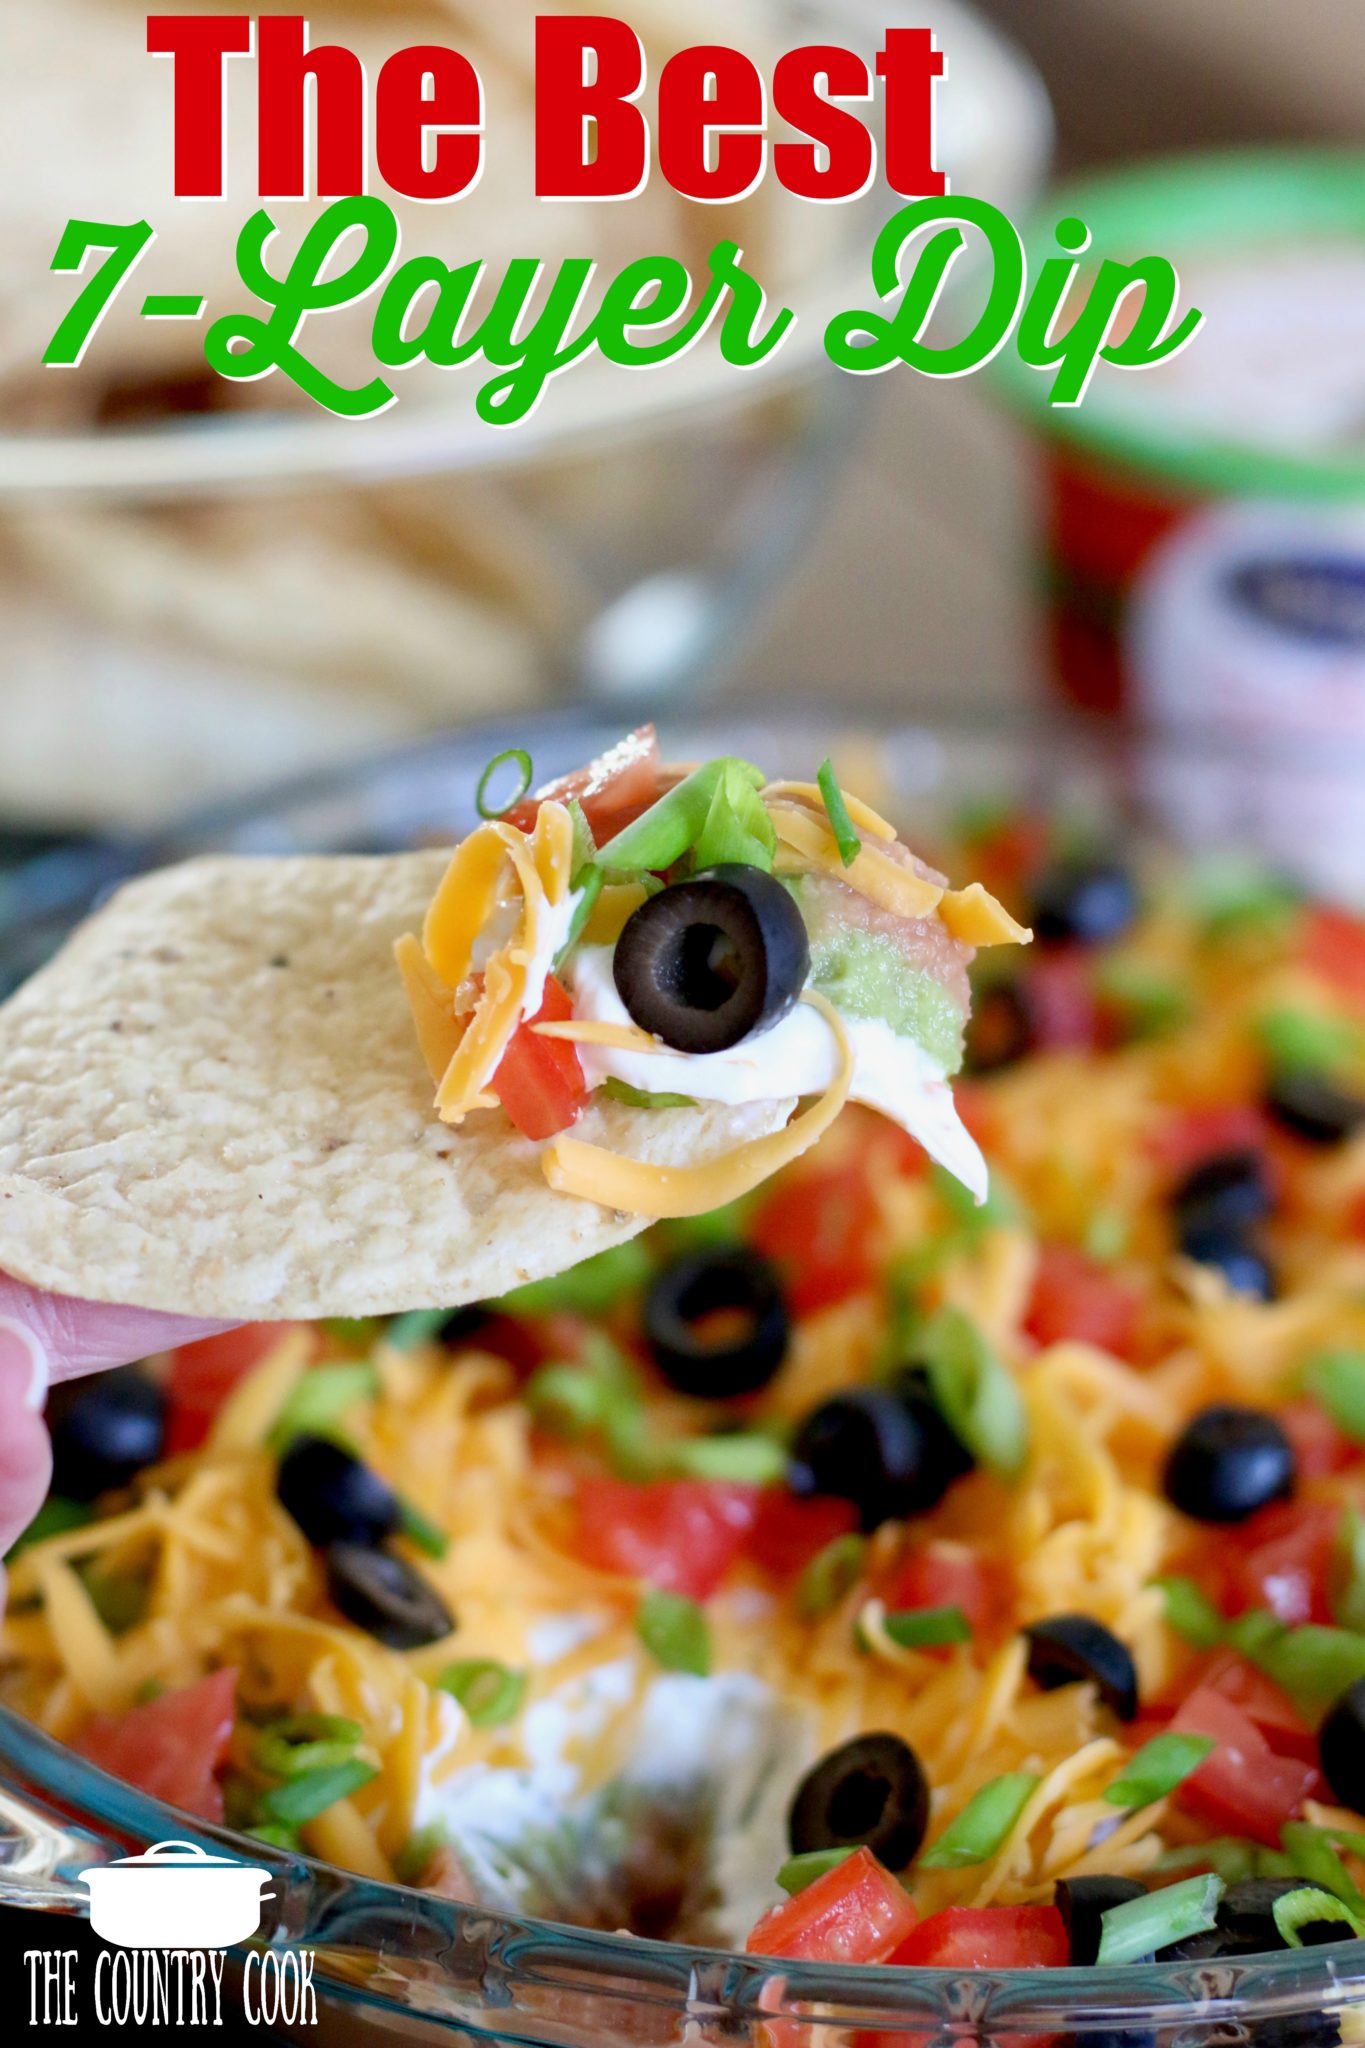 The Best Mexican 7-Layer Dip recipe from The Country Cook